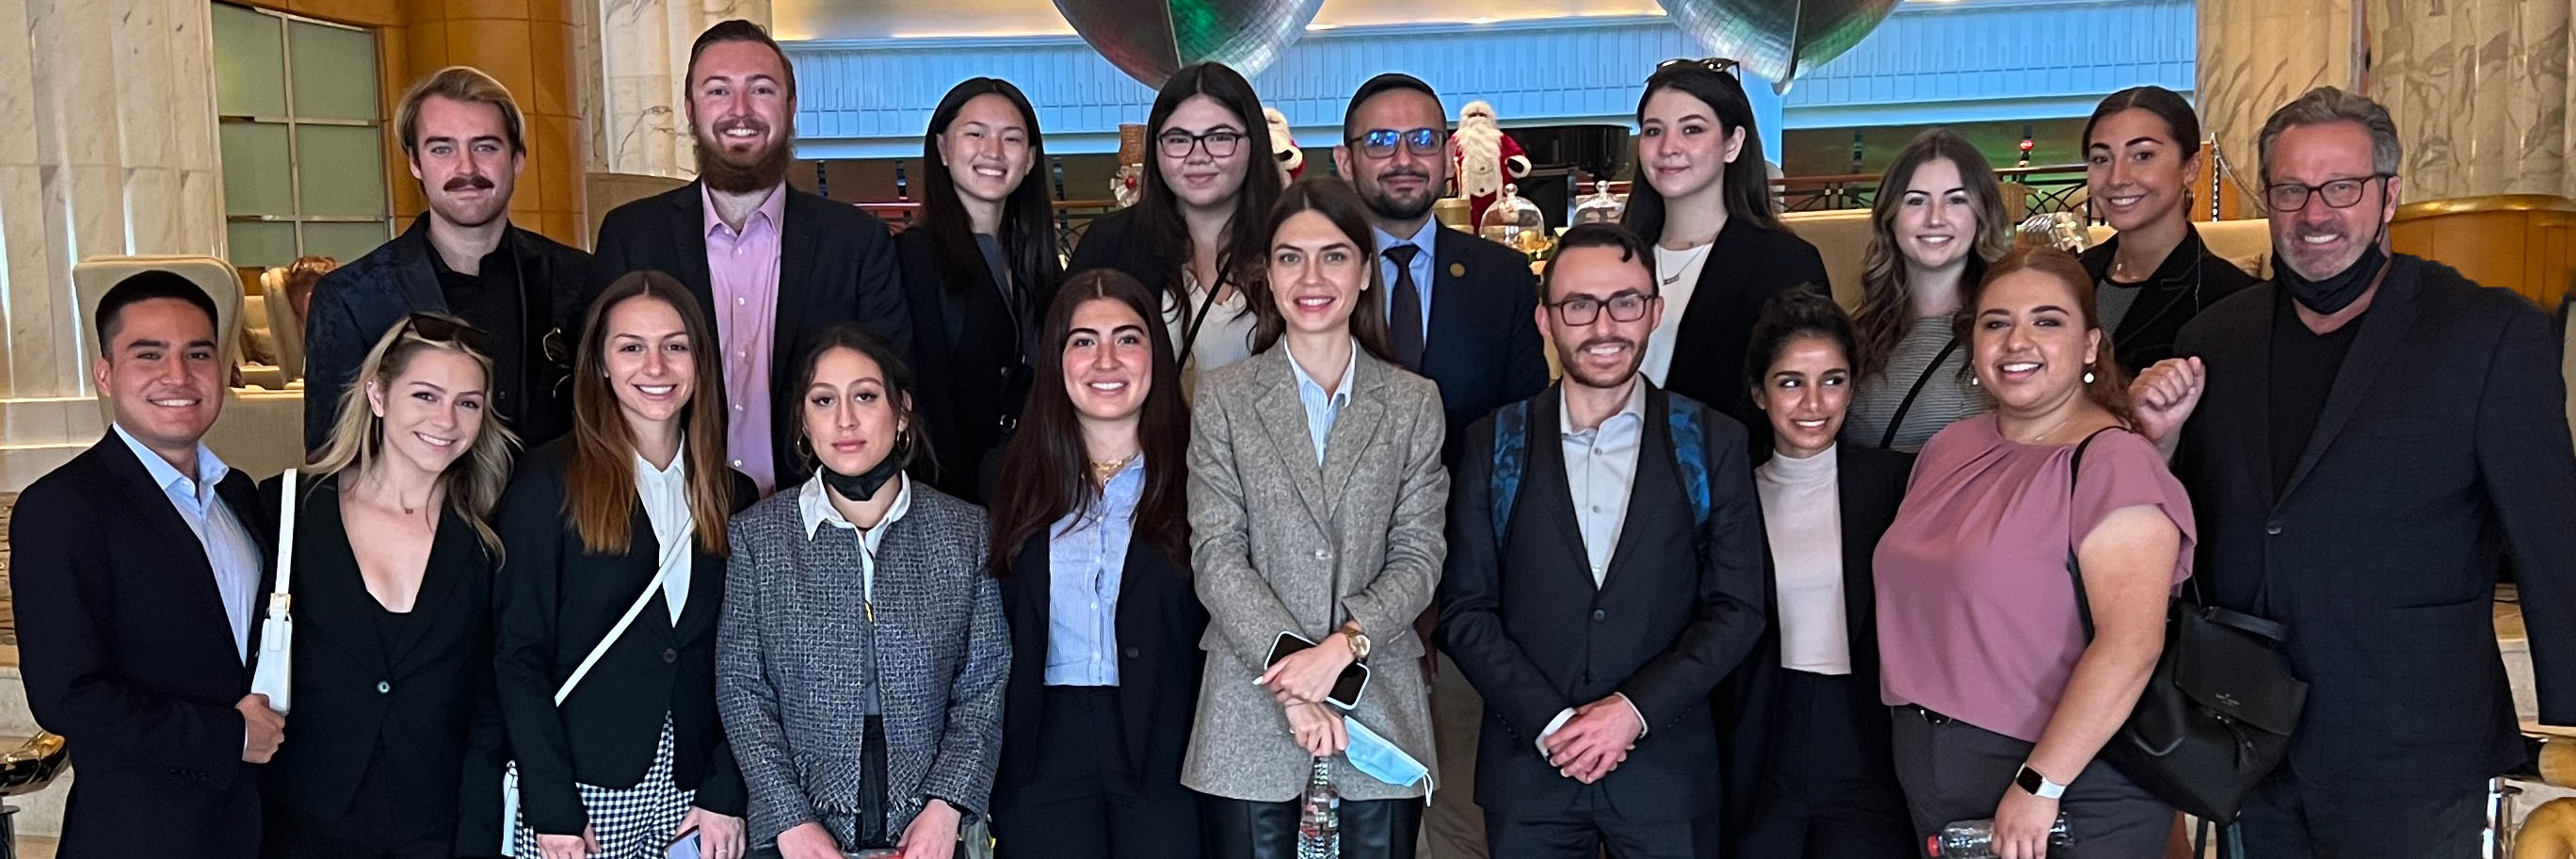 Hospitality and Tourism Management Students Attend Dubai World 2020 Expo